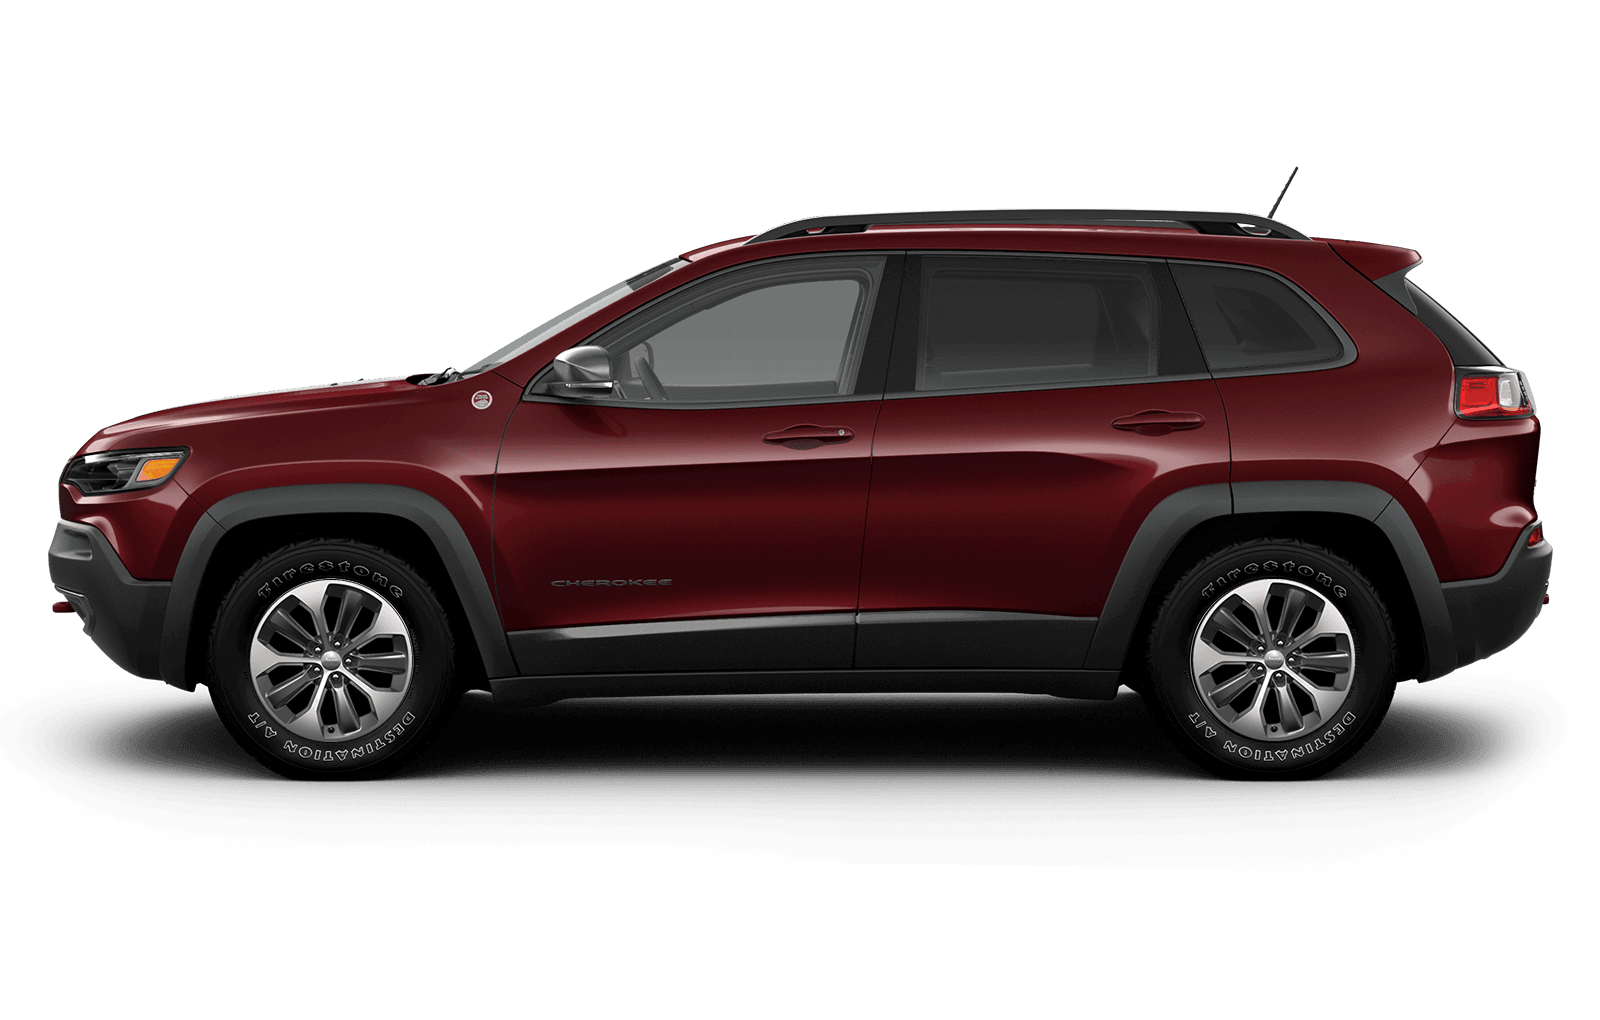 2020 Jeep Cherokee PNG Image File